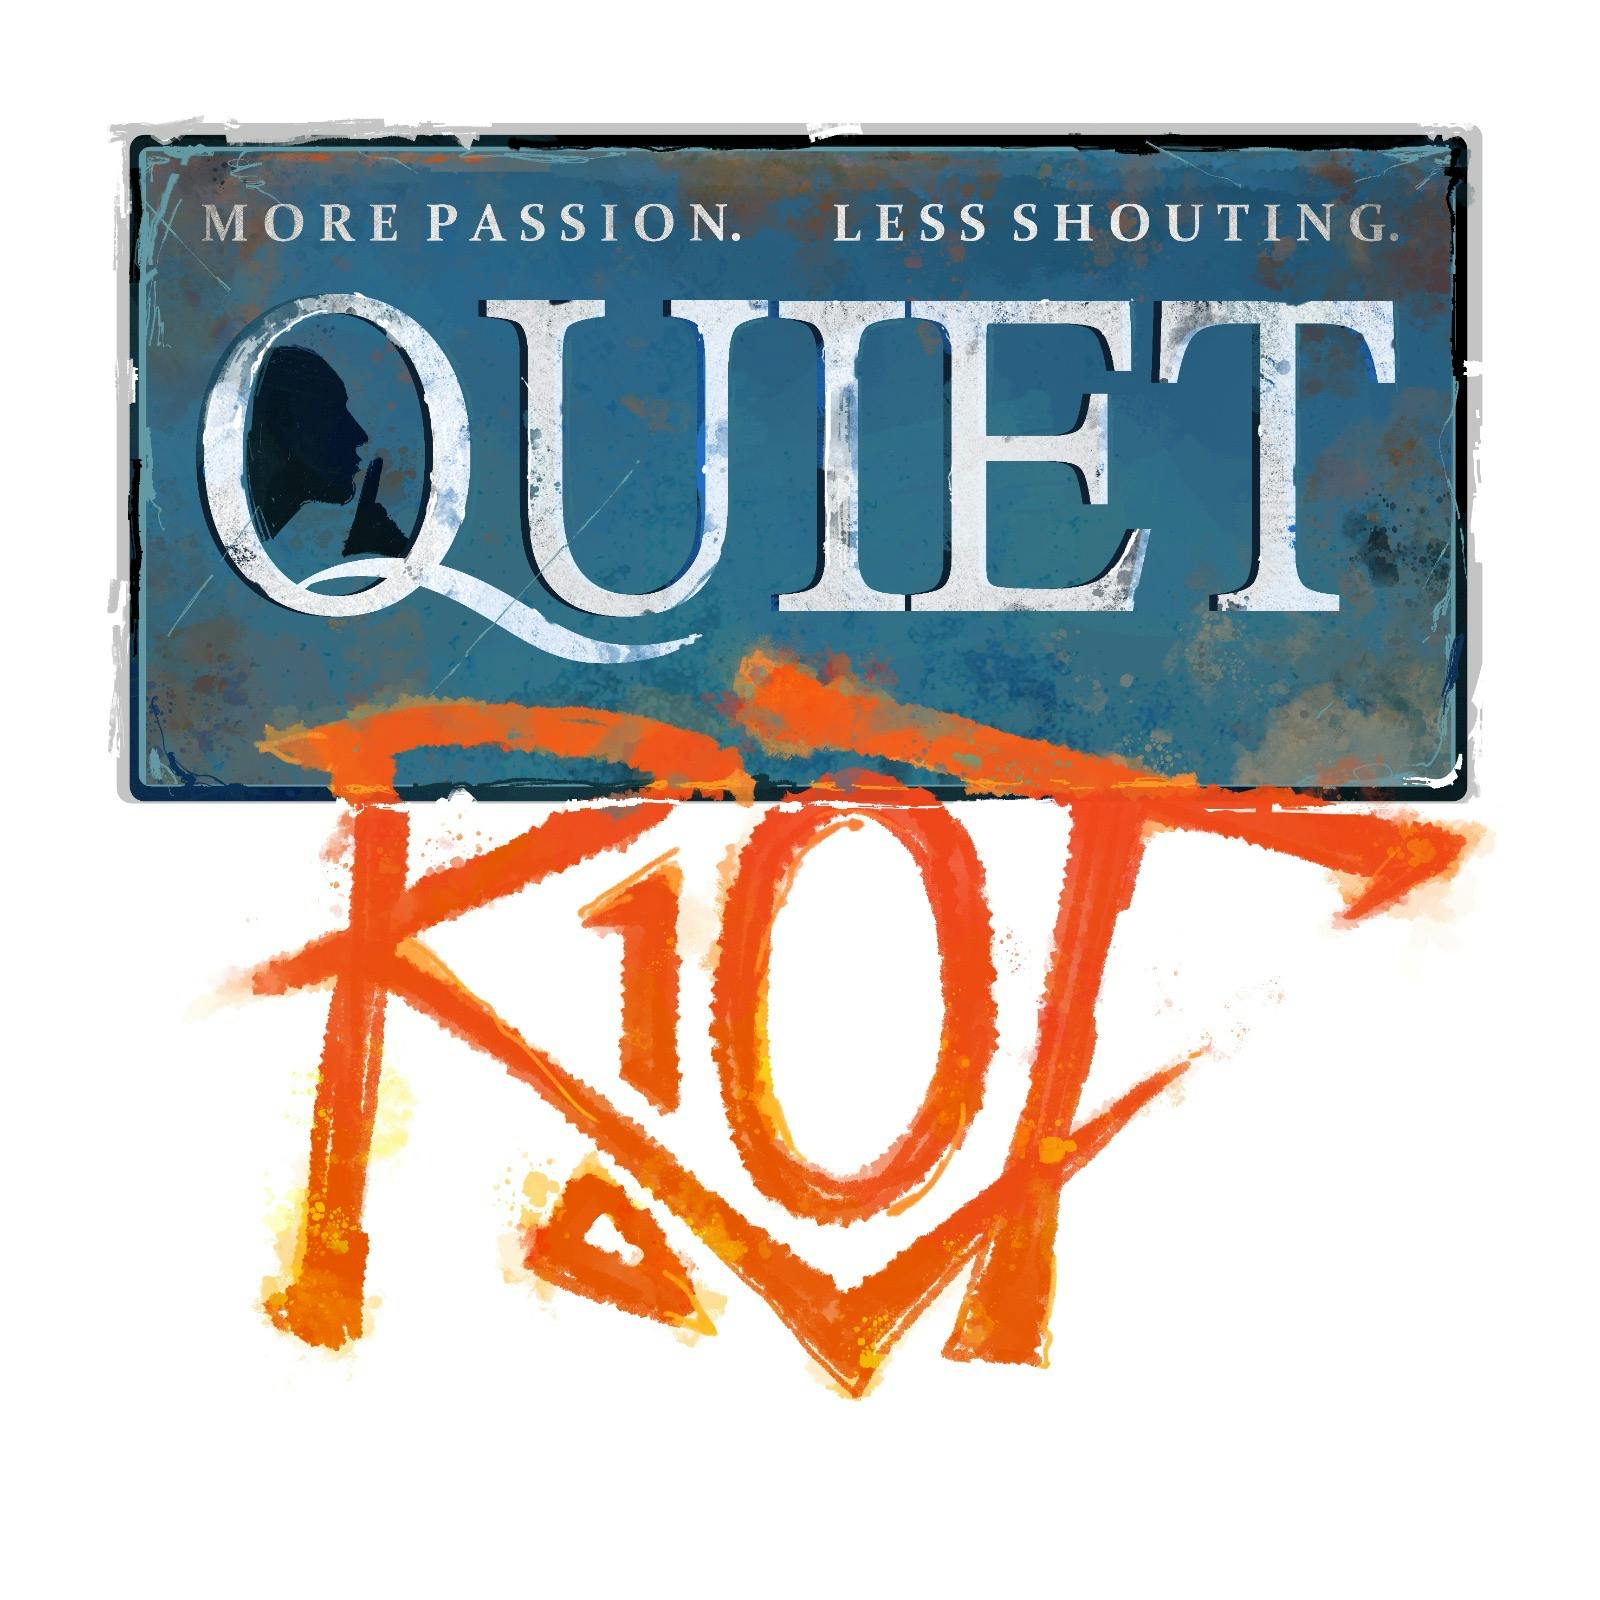 Quiet Riot, Episode 2 - All About That Base